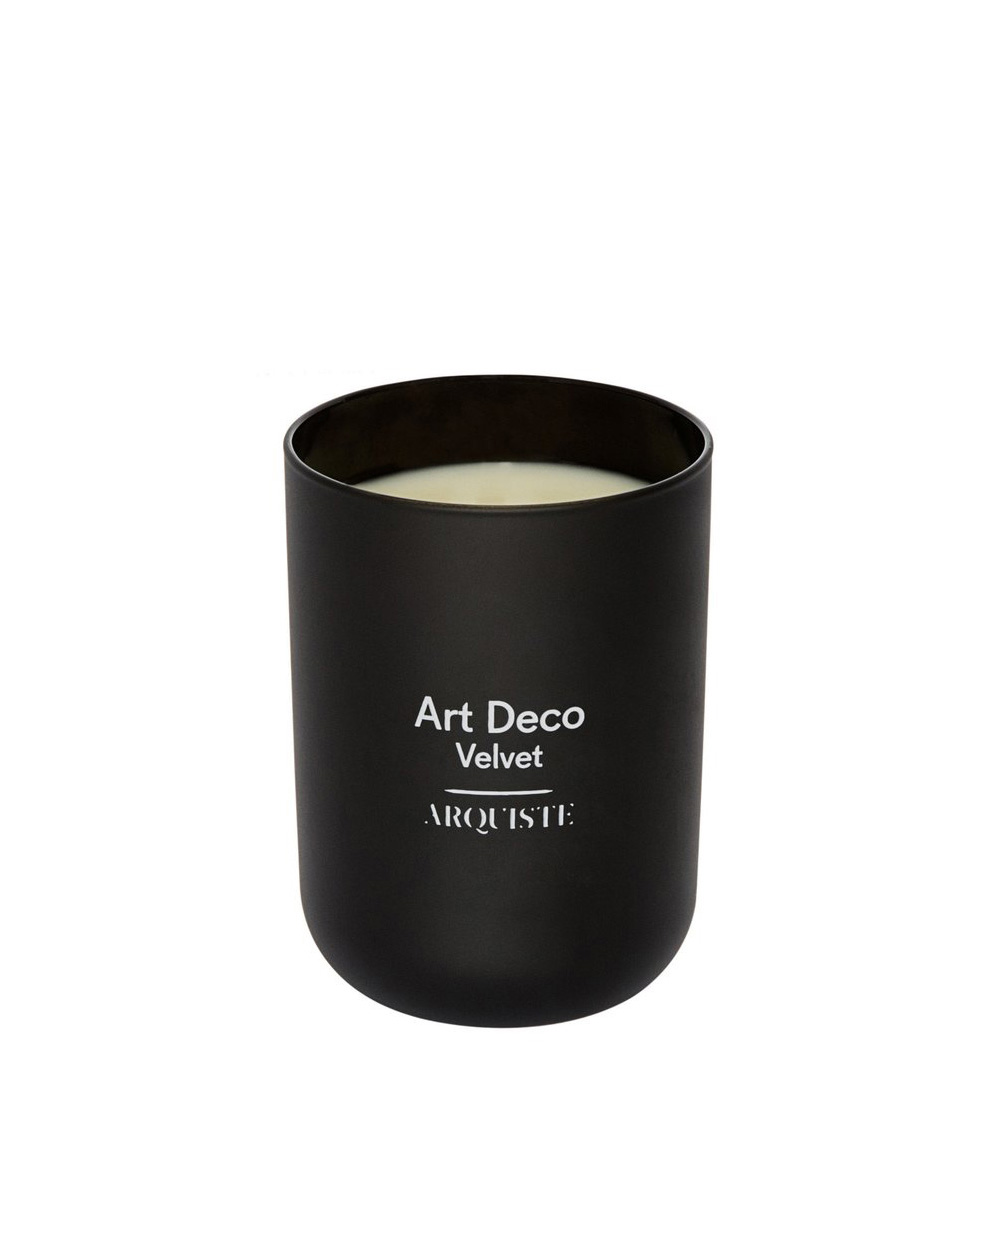 Arquiste Art Deco candle, $139 from WORLD Beauty